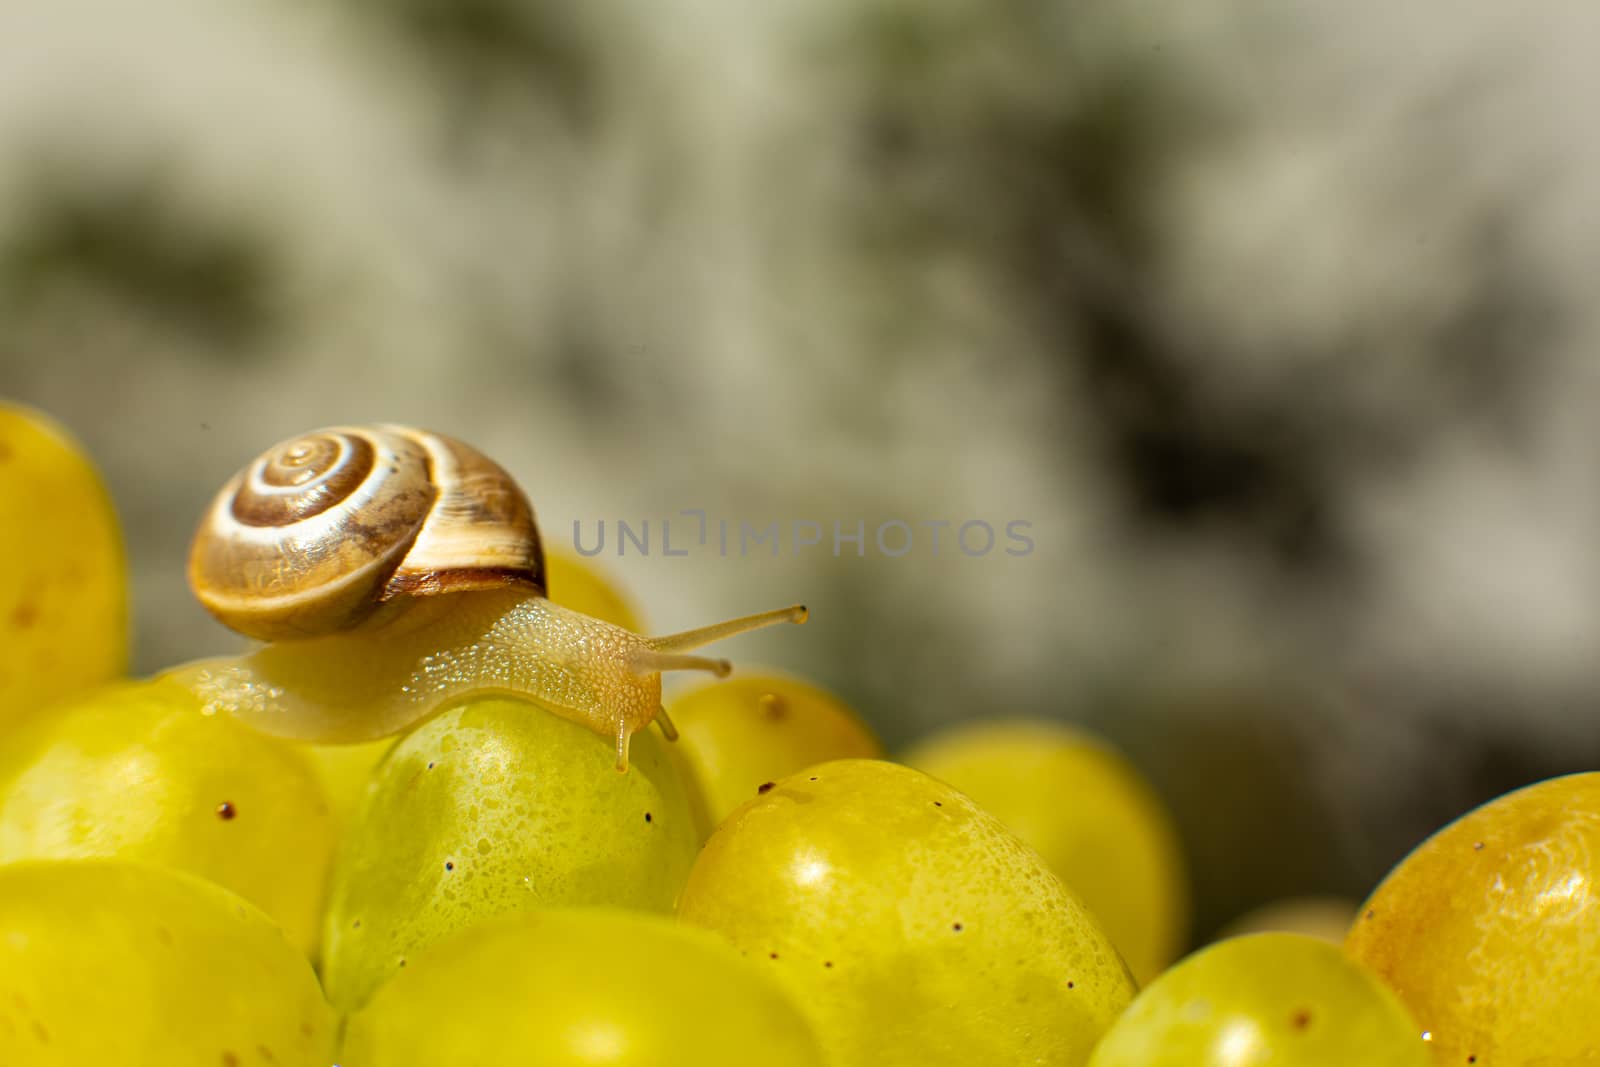 Close-up of a small snail crawling over grapes quiche mish by Try_my_best